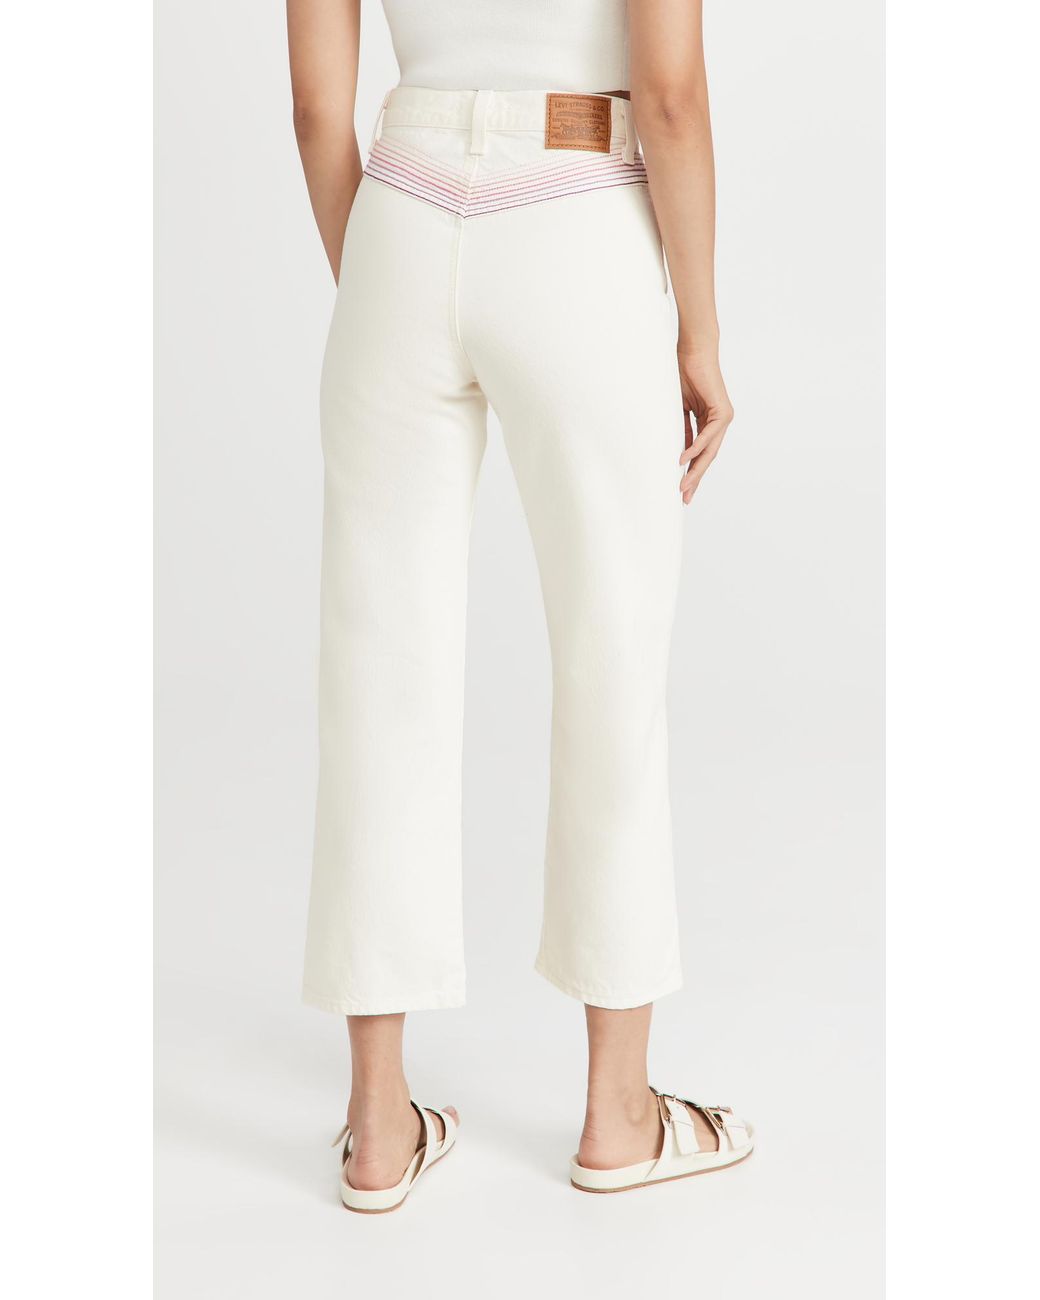 Levi's Ribcage Rainbow Jeans in White | Lyst